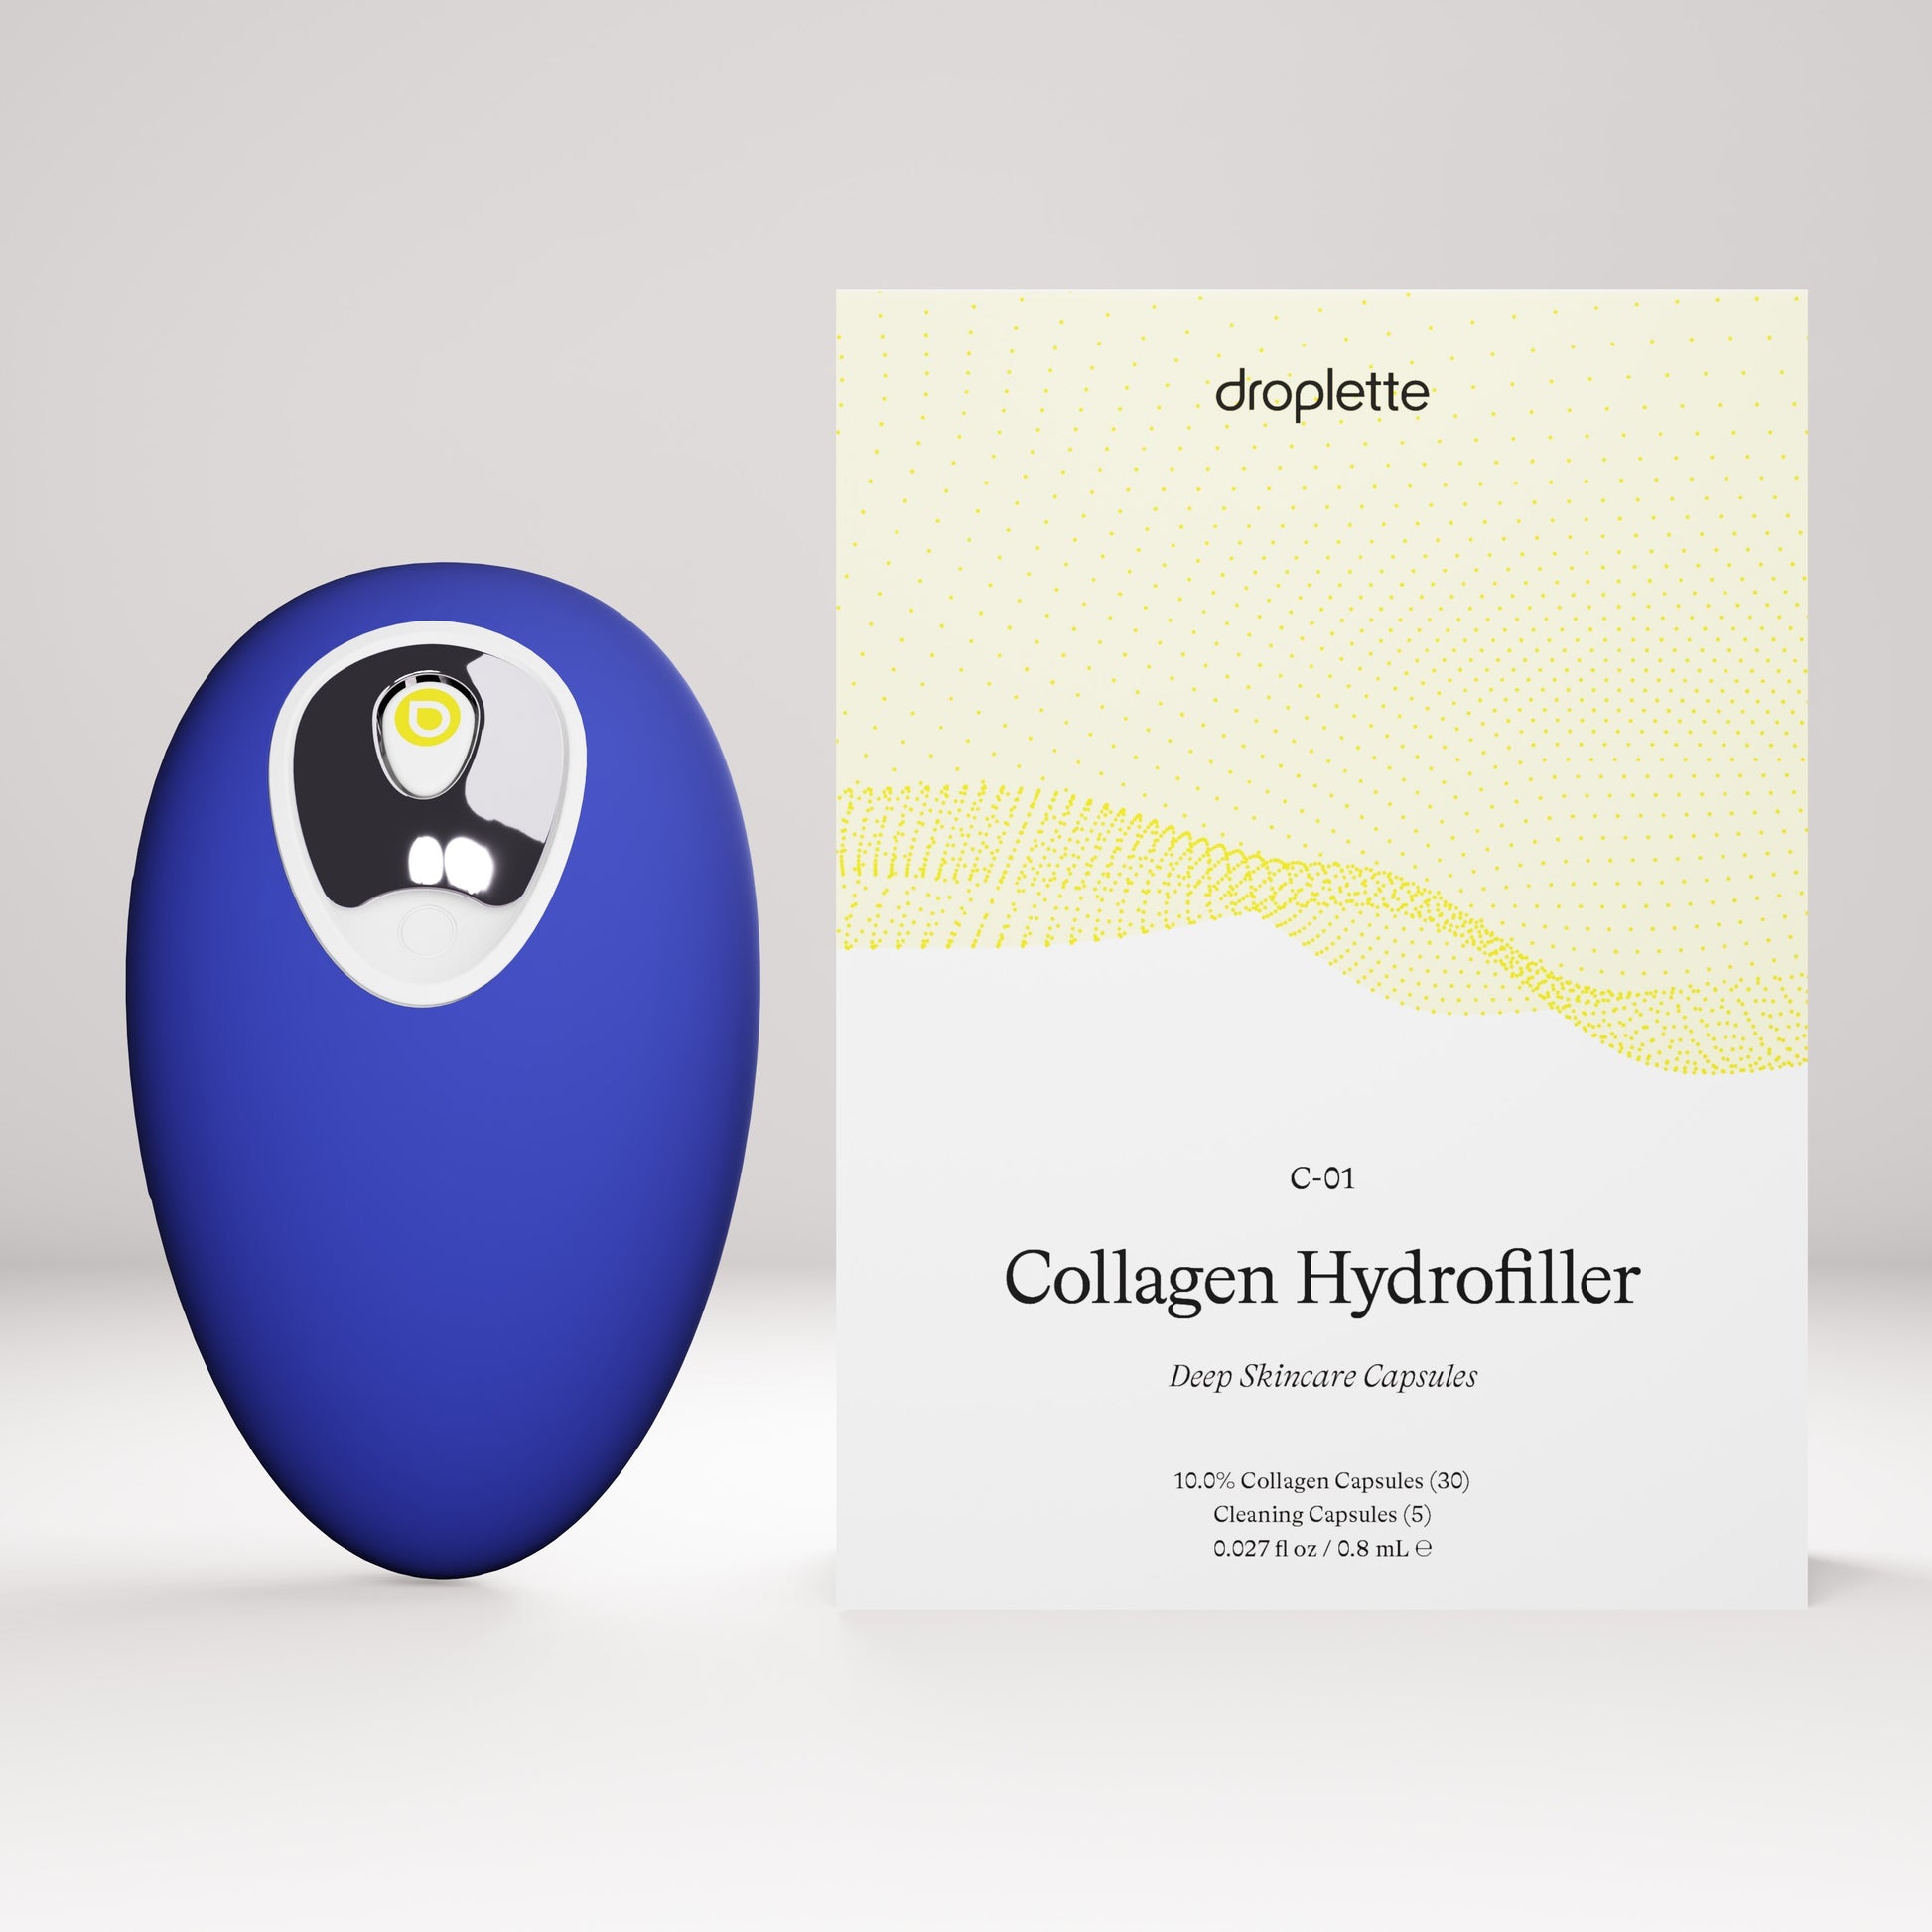 Cobalt Blue Droplette Device sits beside a 30 capsule sized box of Droplette's Collagen Hydrofiller capsules